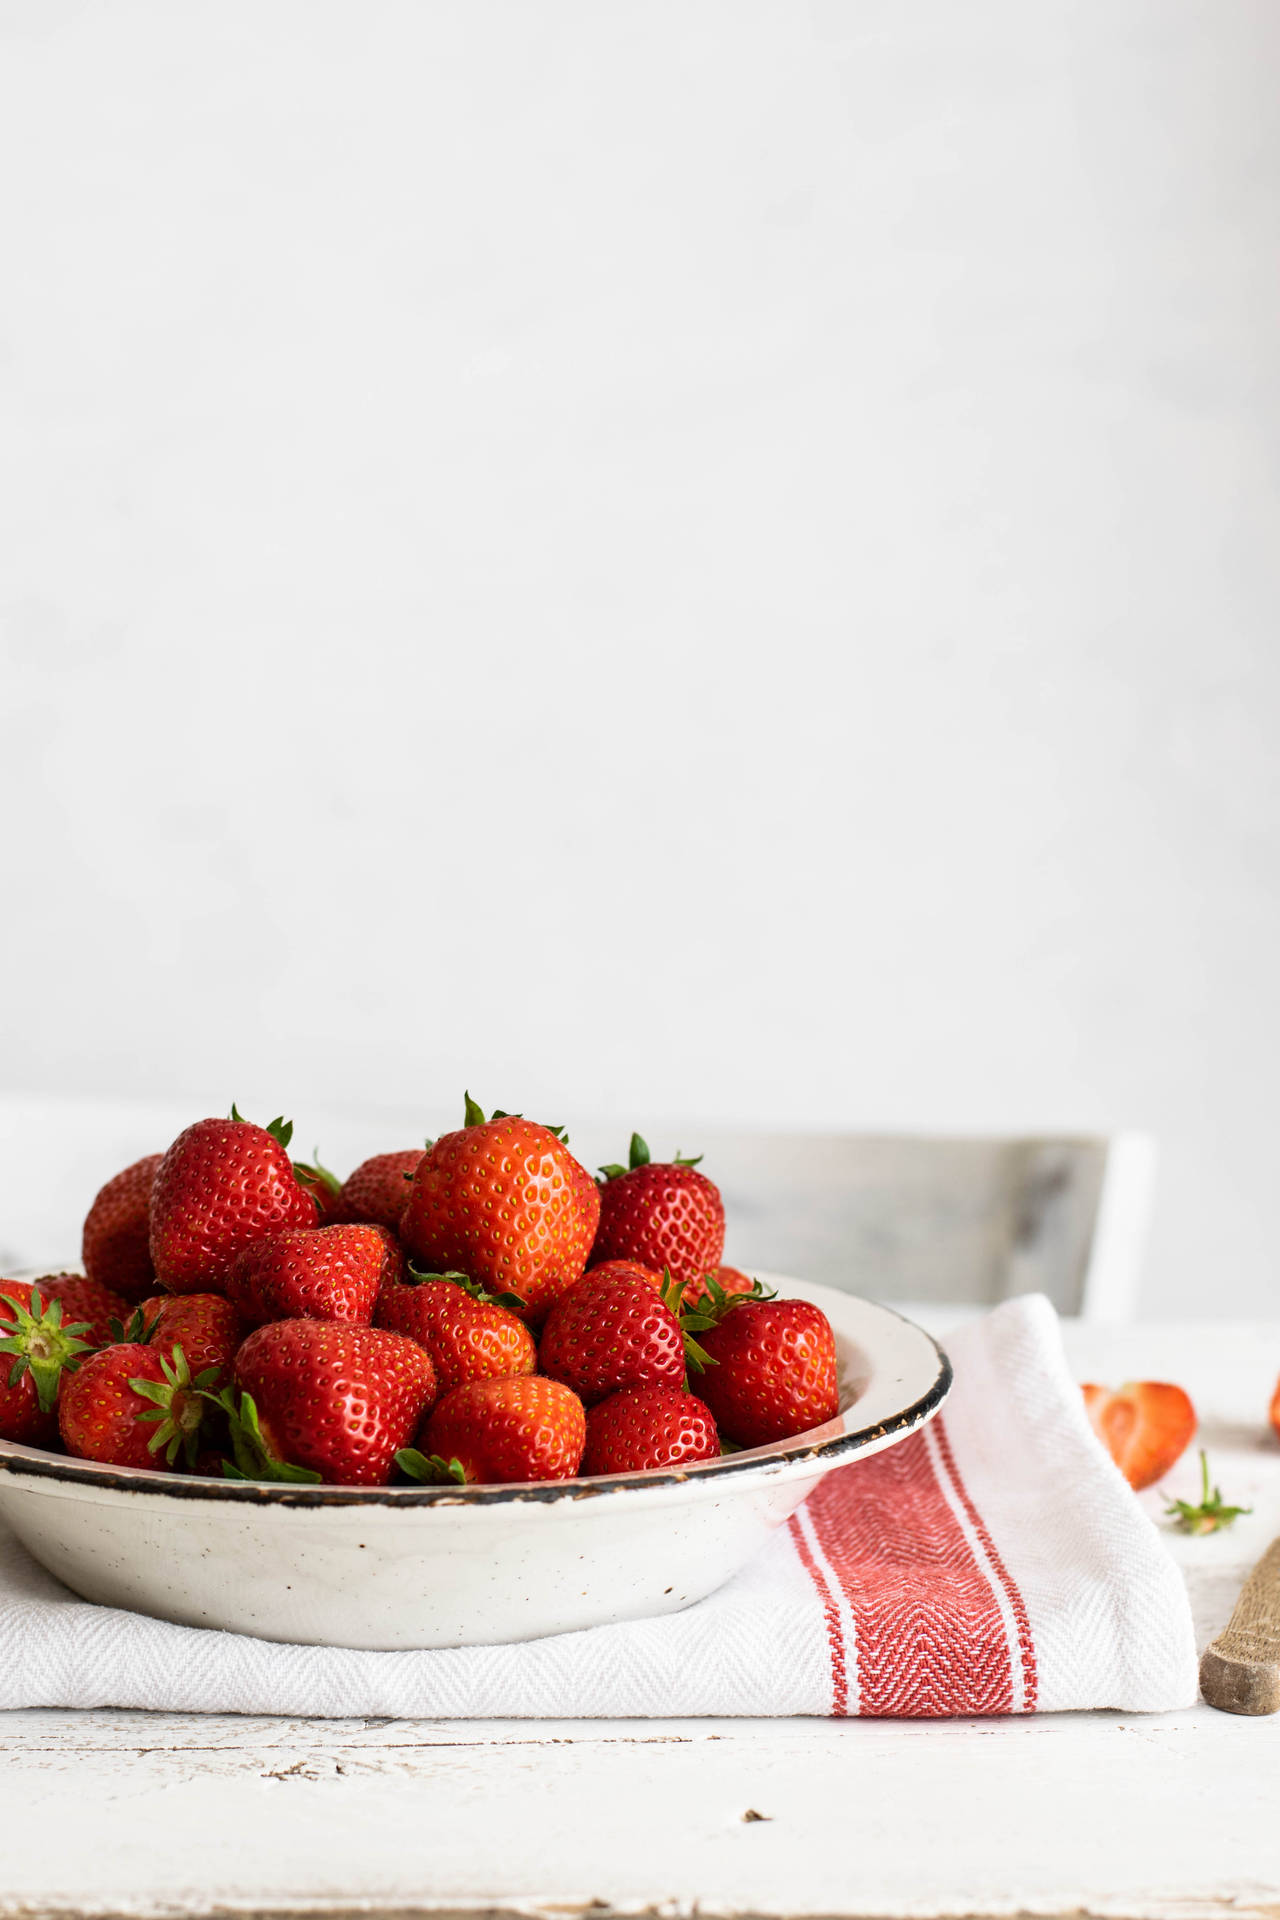 Strawberry Fruit On White Plate Background